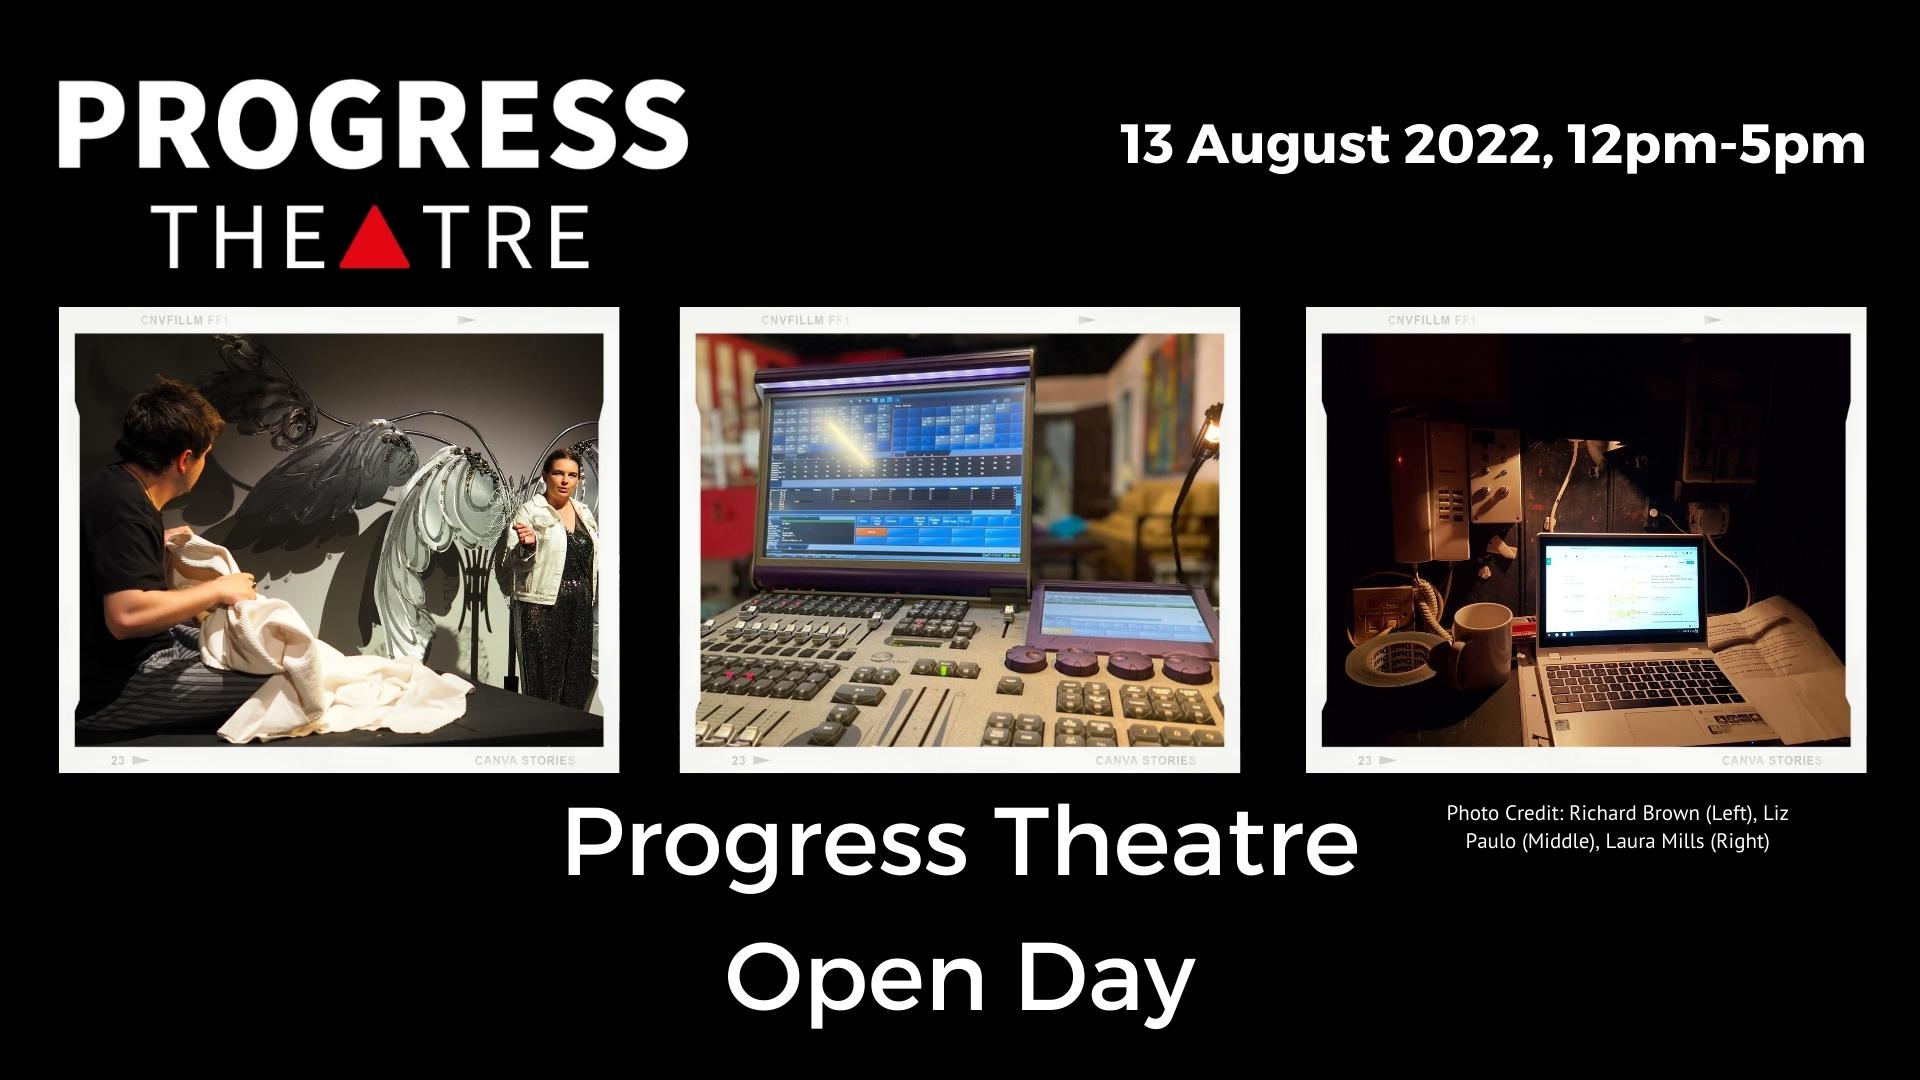 OPEN DAY 13 August 2022